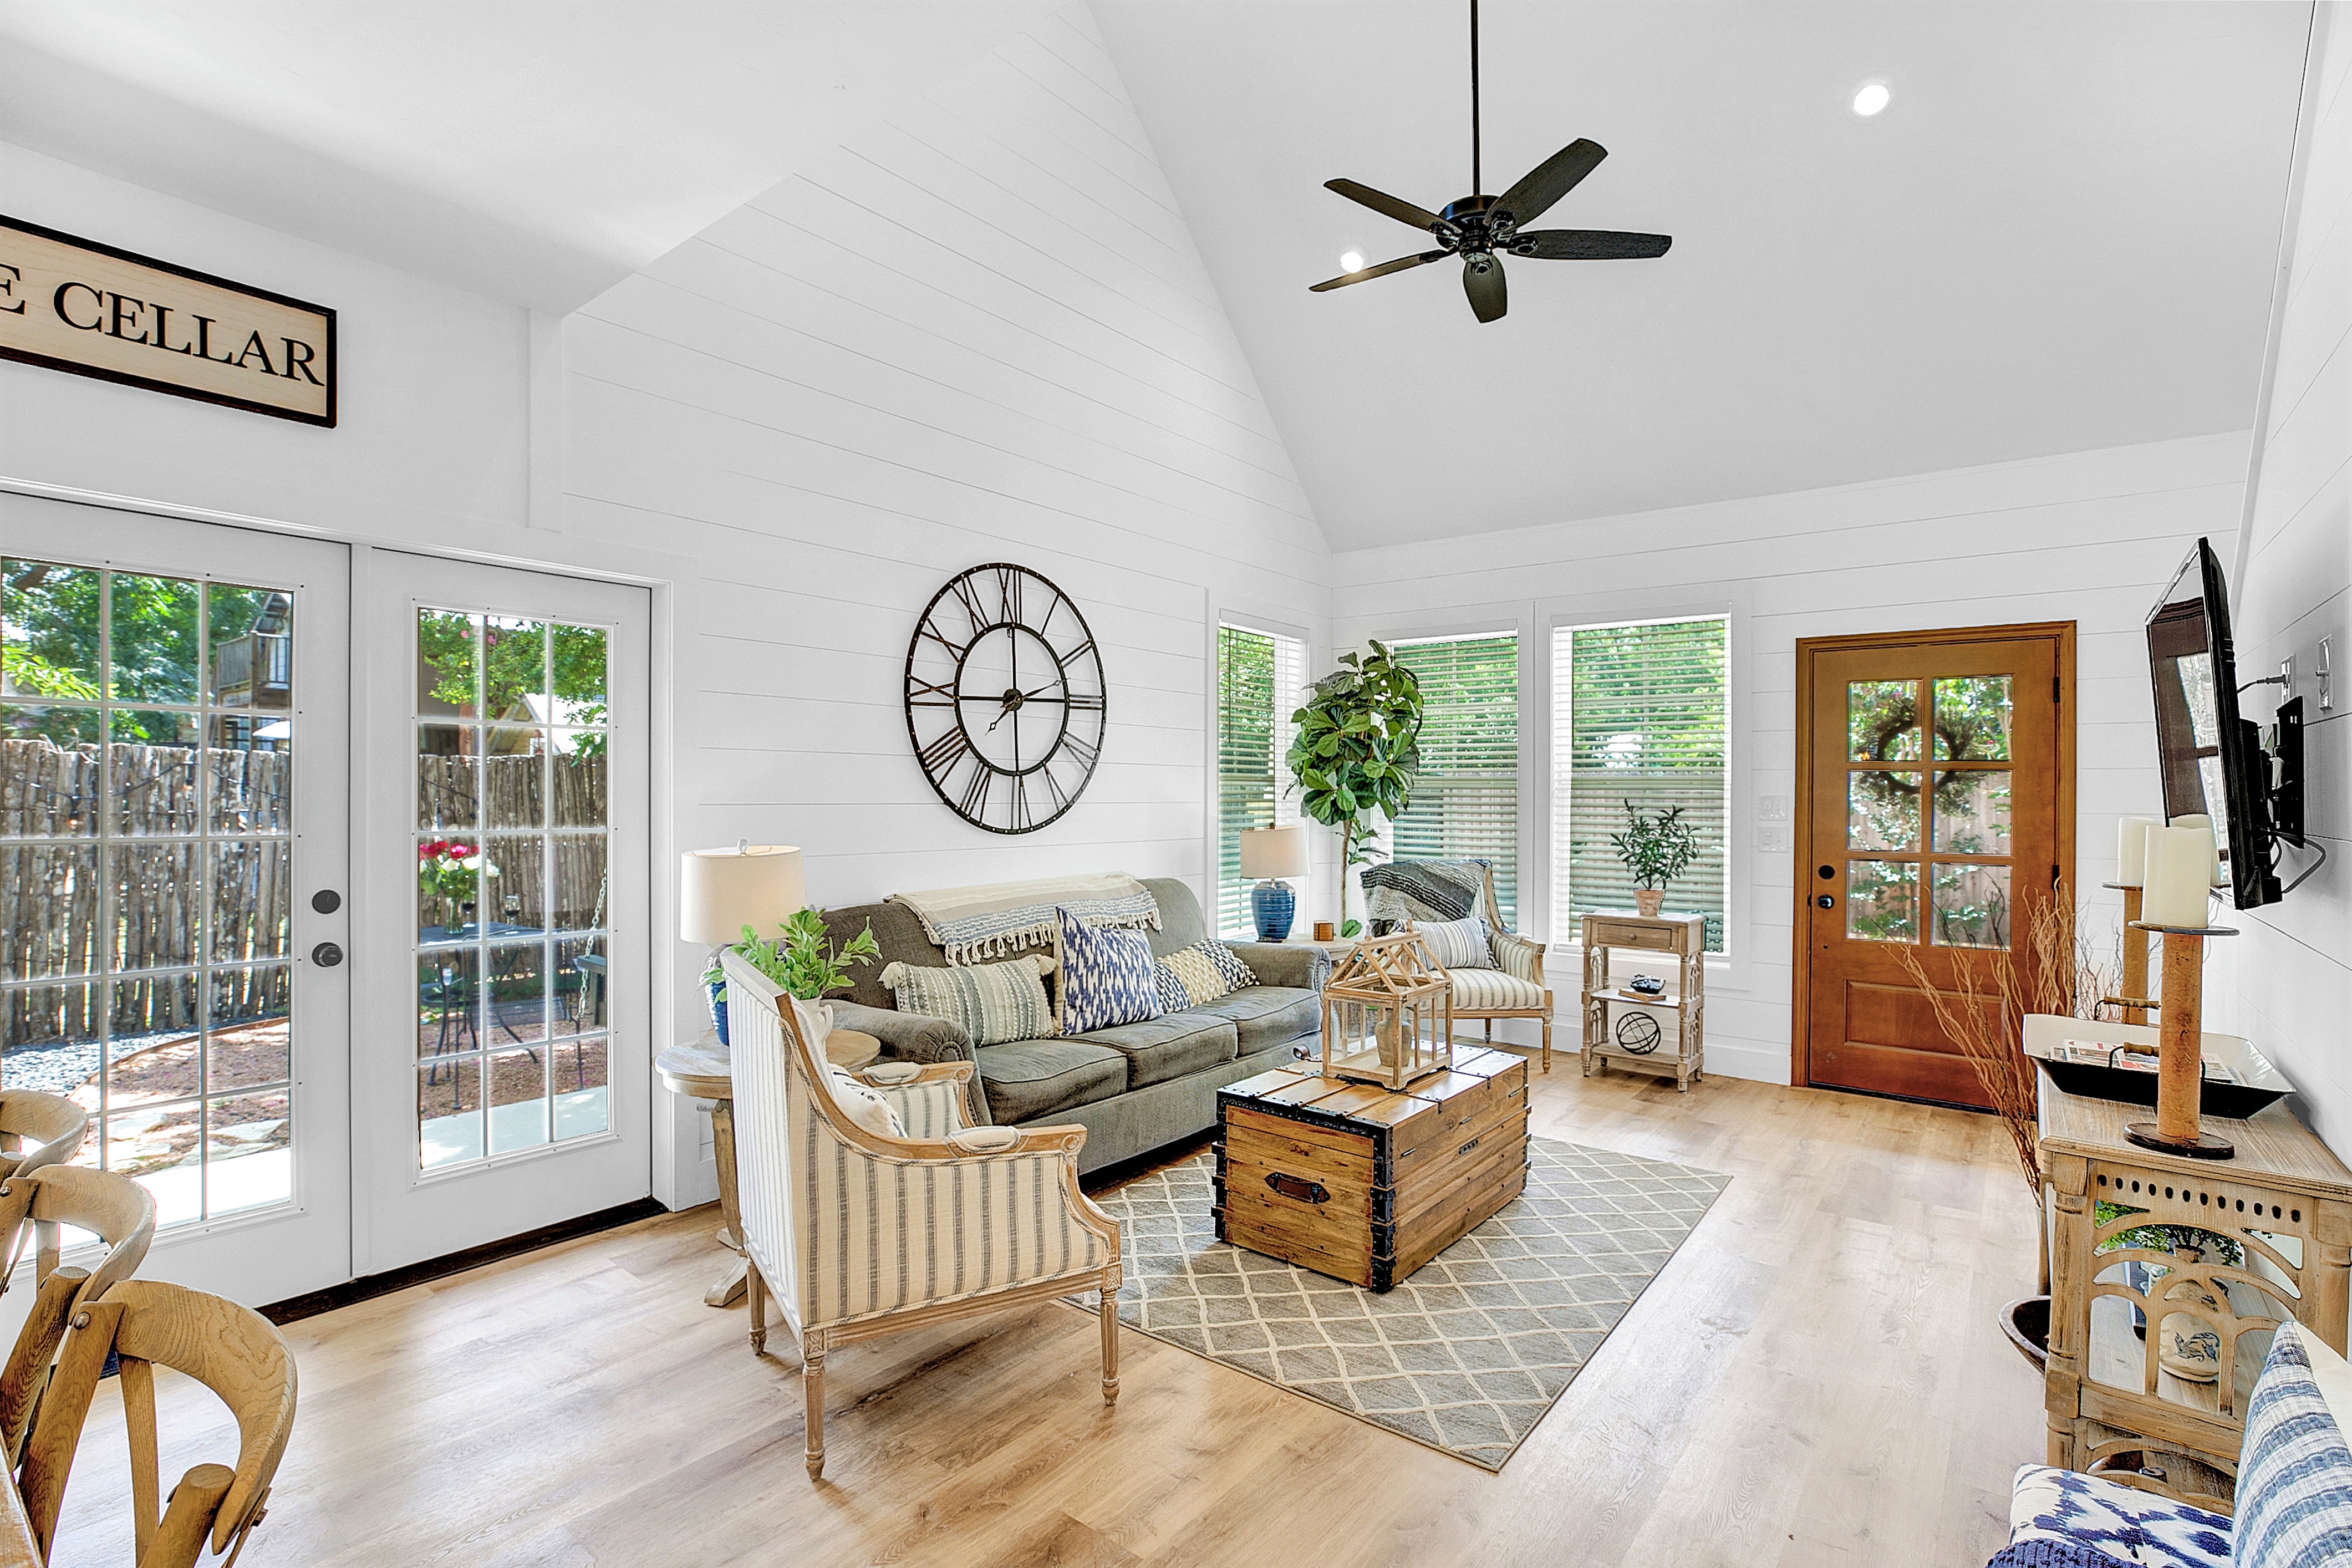 Bask in the roominess of the living room with vaulted ceilings.